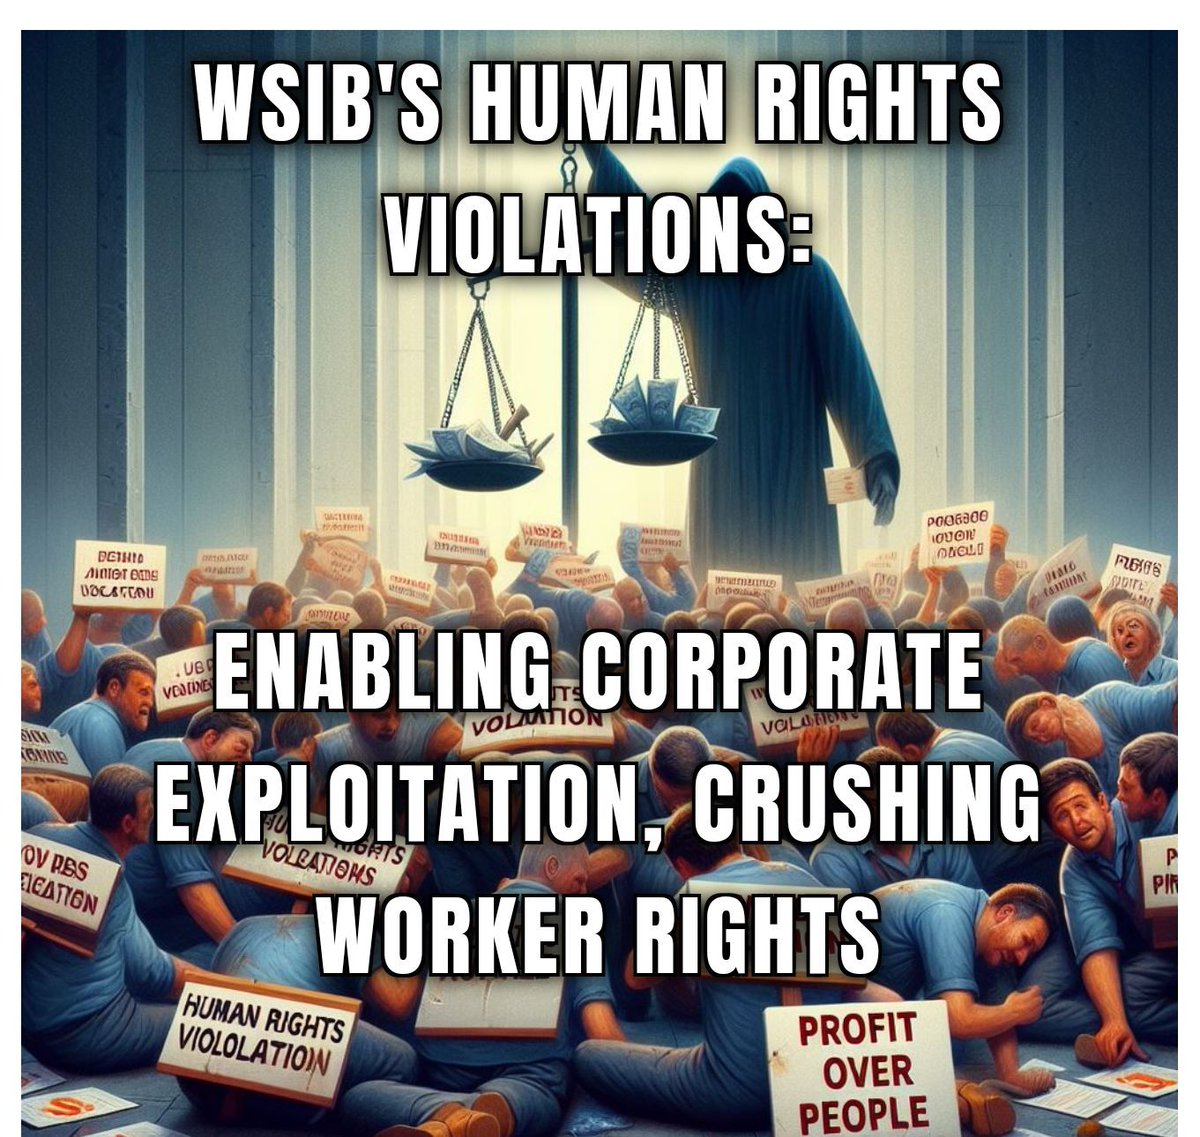 WSIB's human rights violations: enabling corporate exploitation, crushing workers' rights. It's time to hold them accountable and fight for justice! #WorkersCompIsARight #InjuredWorkers #HumanRights